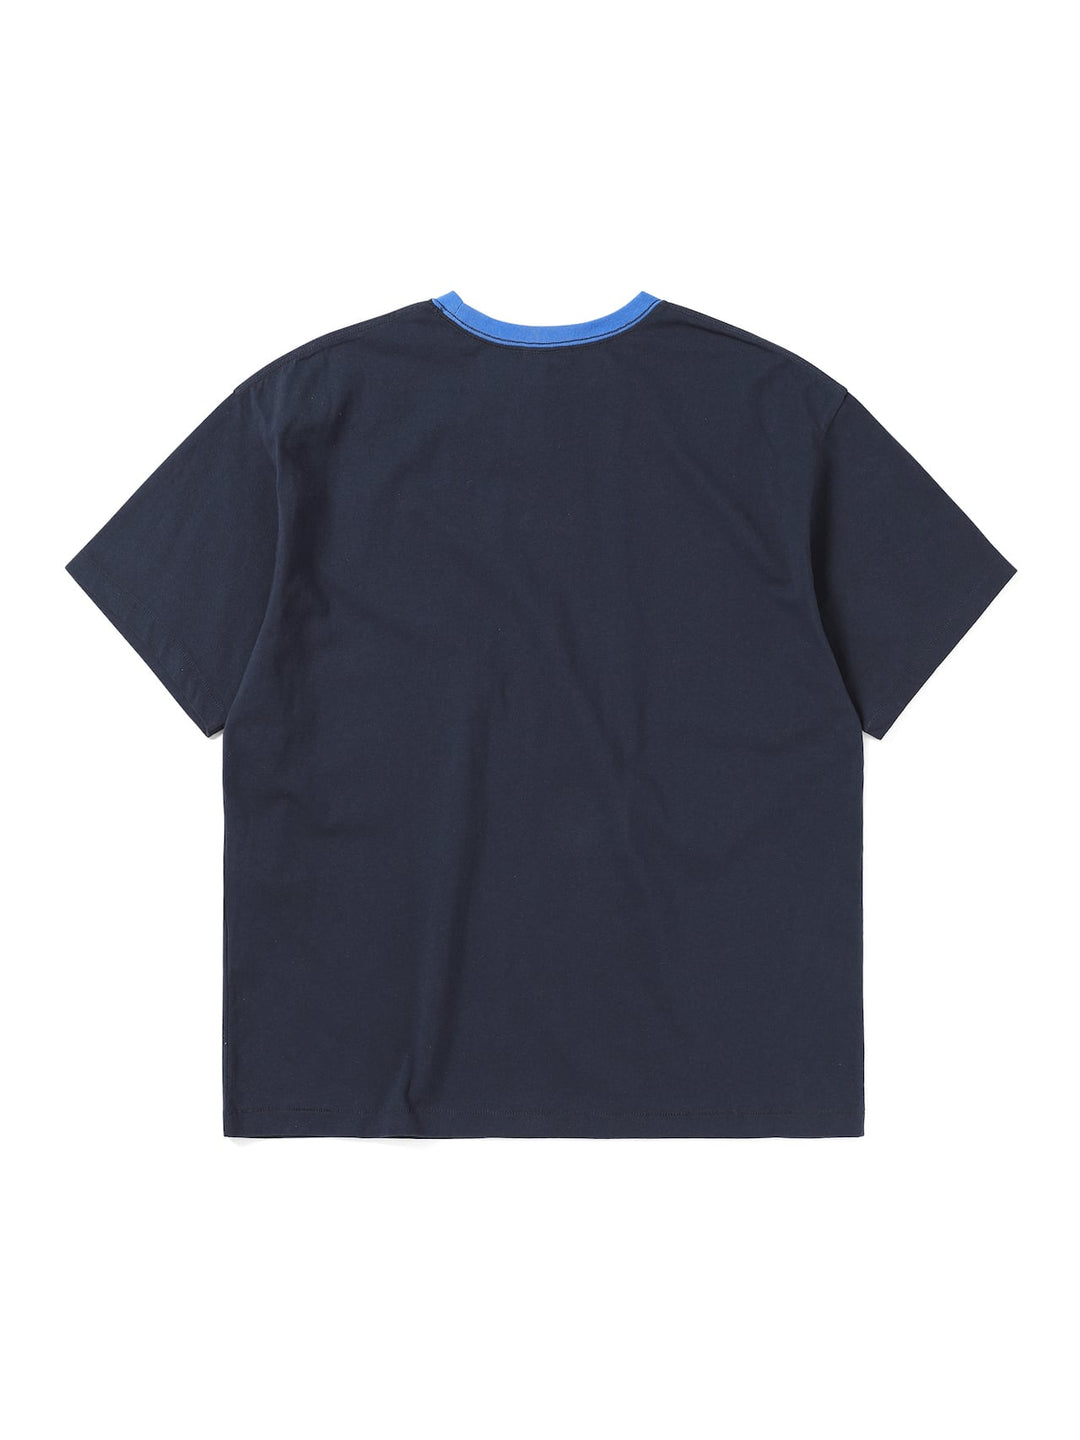 THIS IS NEVER THAT TNT C. 10 TEE-NAVY